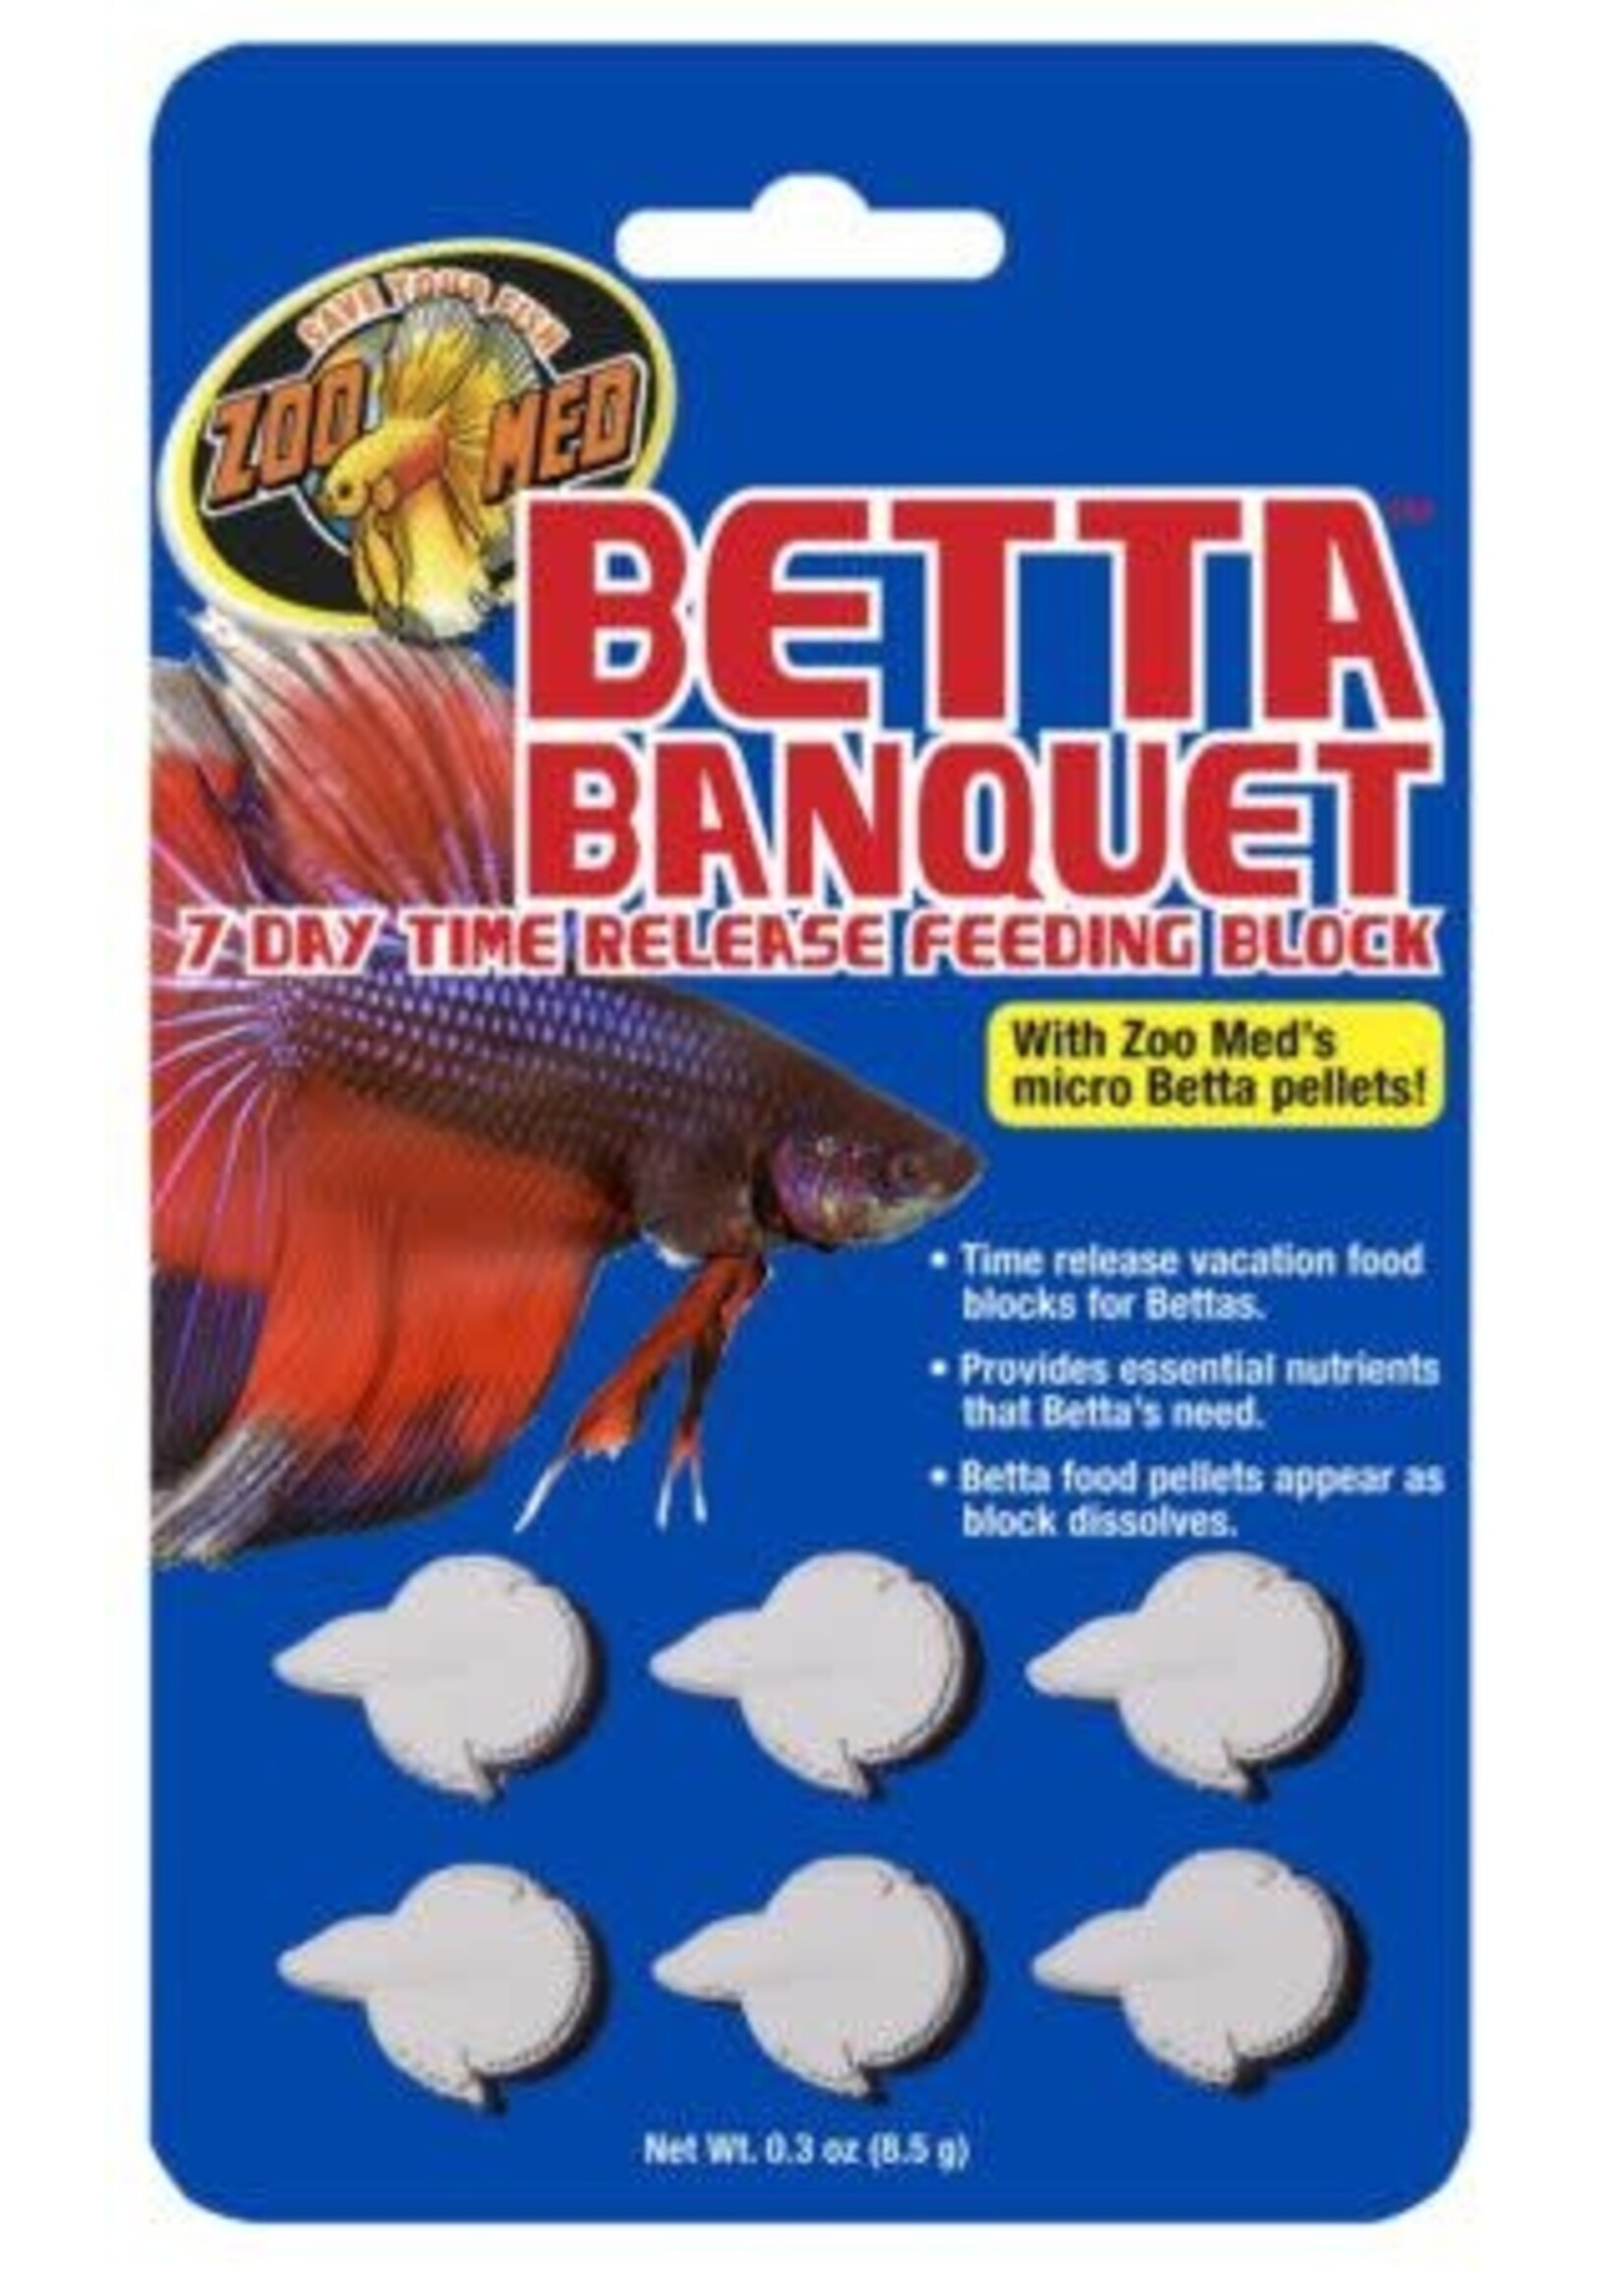 Zoo Med Zoo Med Betta Banquet 7day Time Release 0.3oz